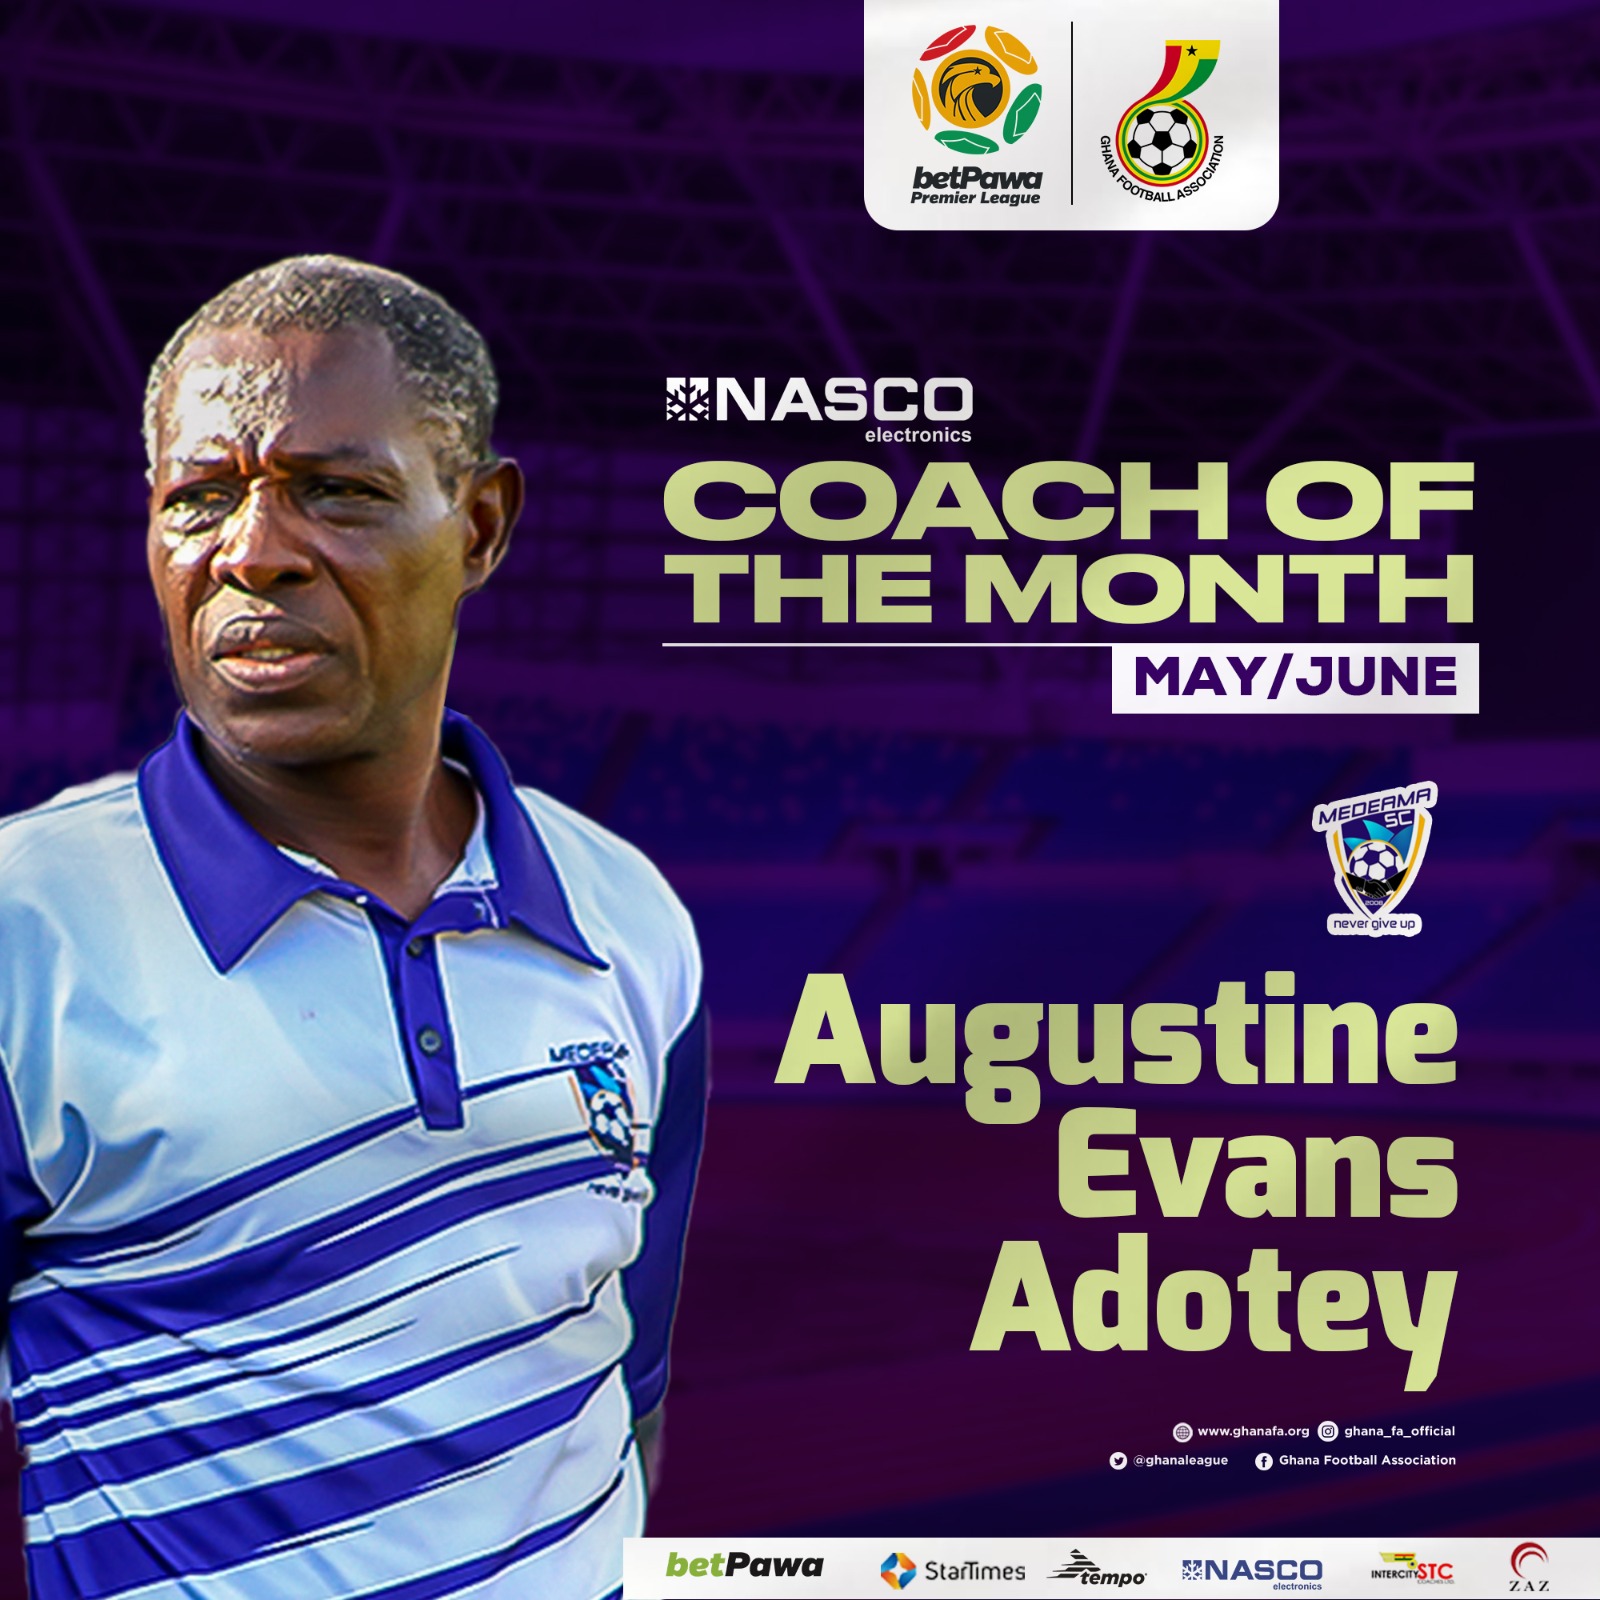 Coach Augustine Evans Adotey wins NASCO coach of the month for May/June